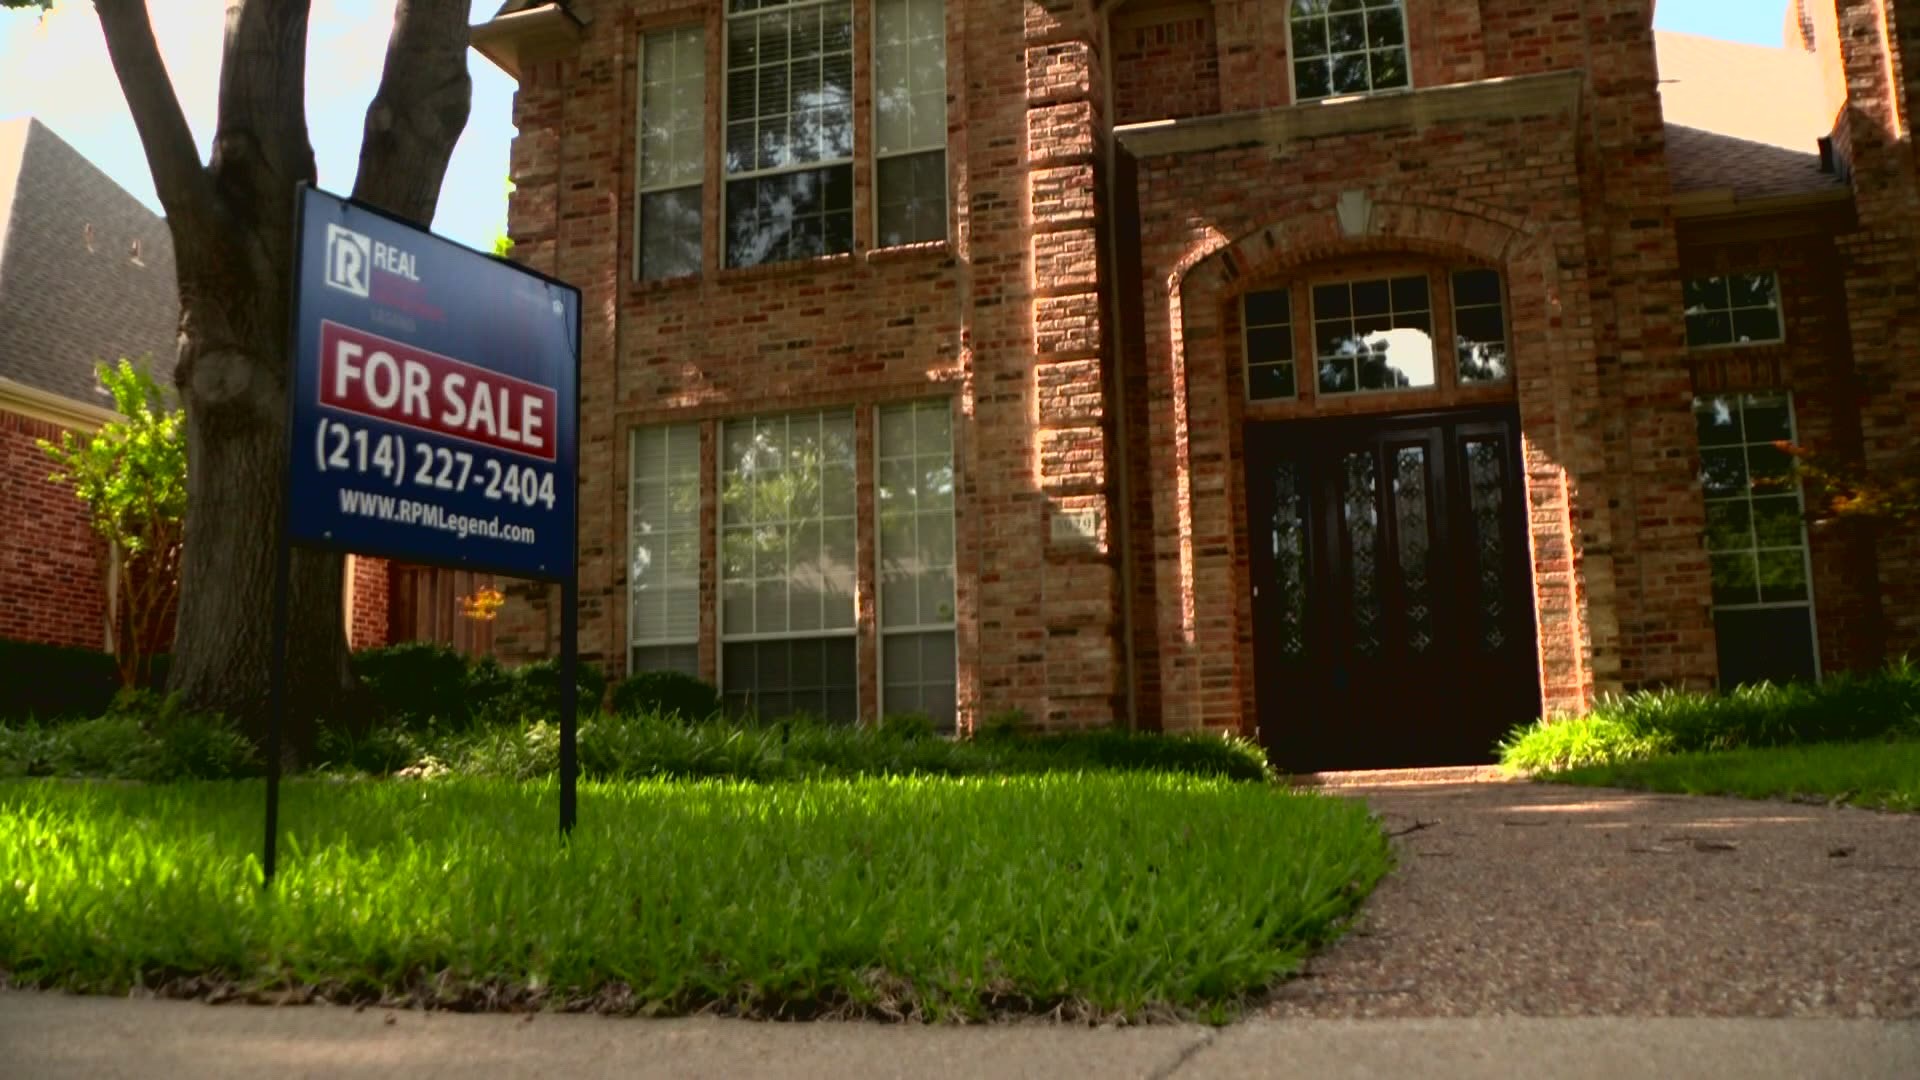 The median home price in Collin County is now more than $440,000, according to the MetroTex Association of Realtors.